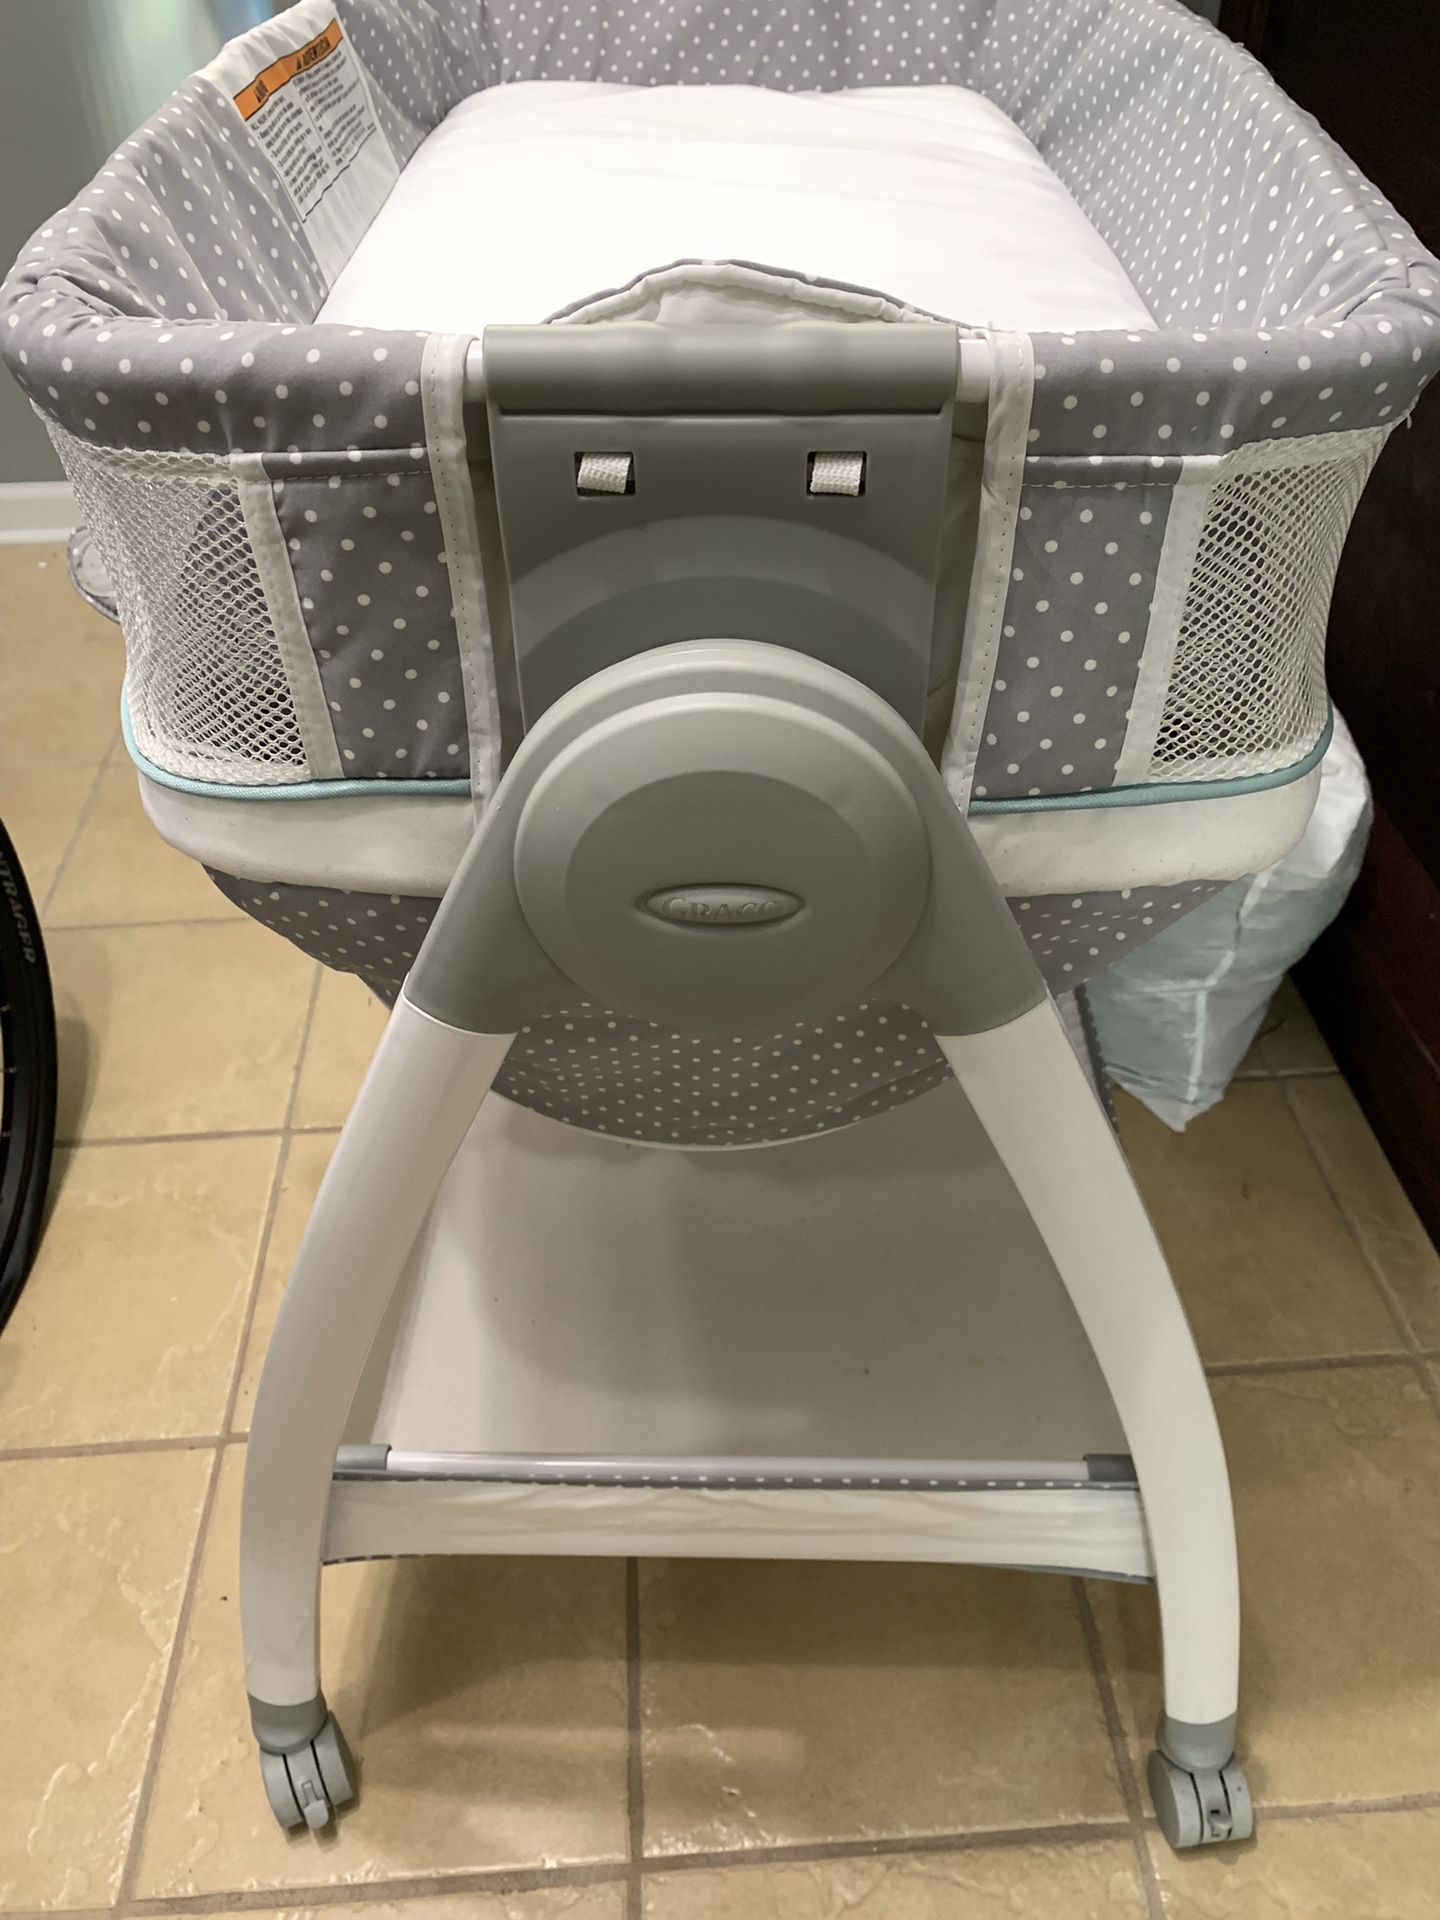 Graco bassinet changing table